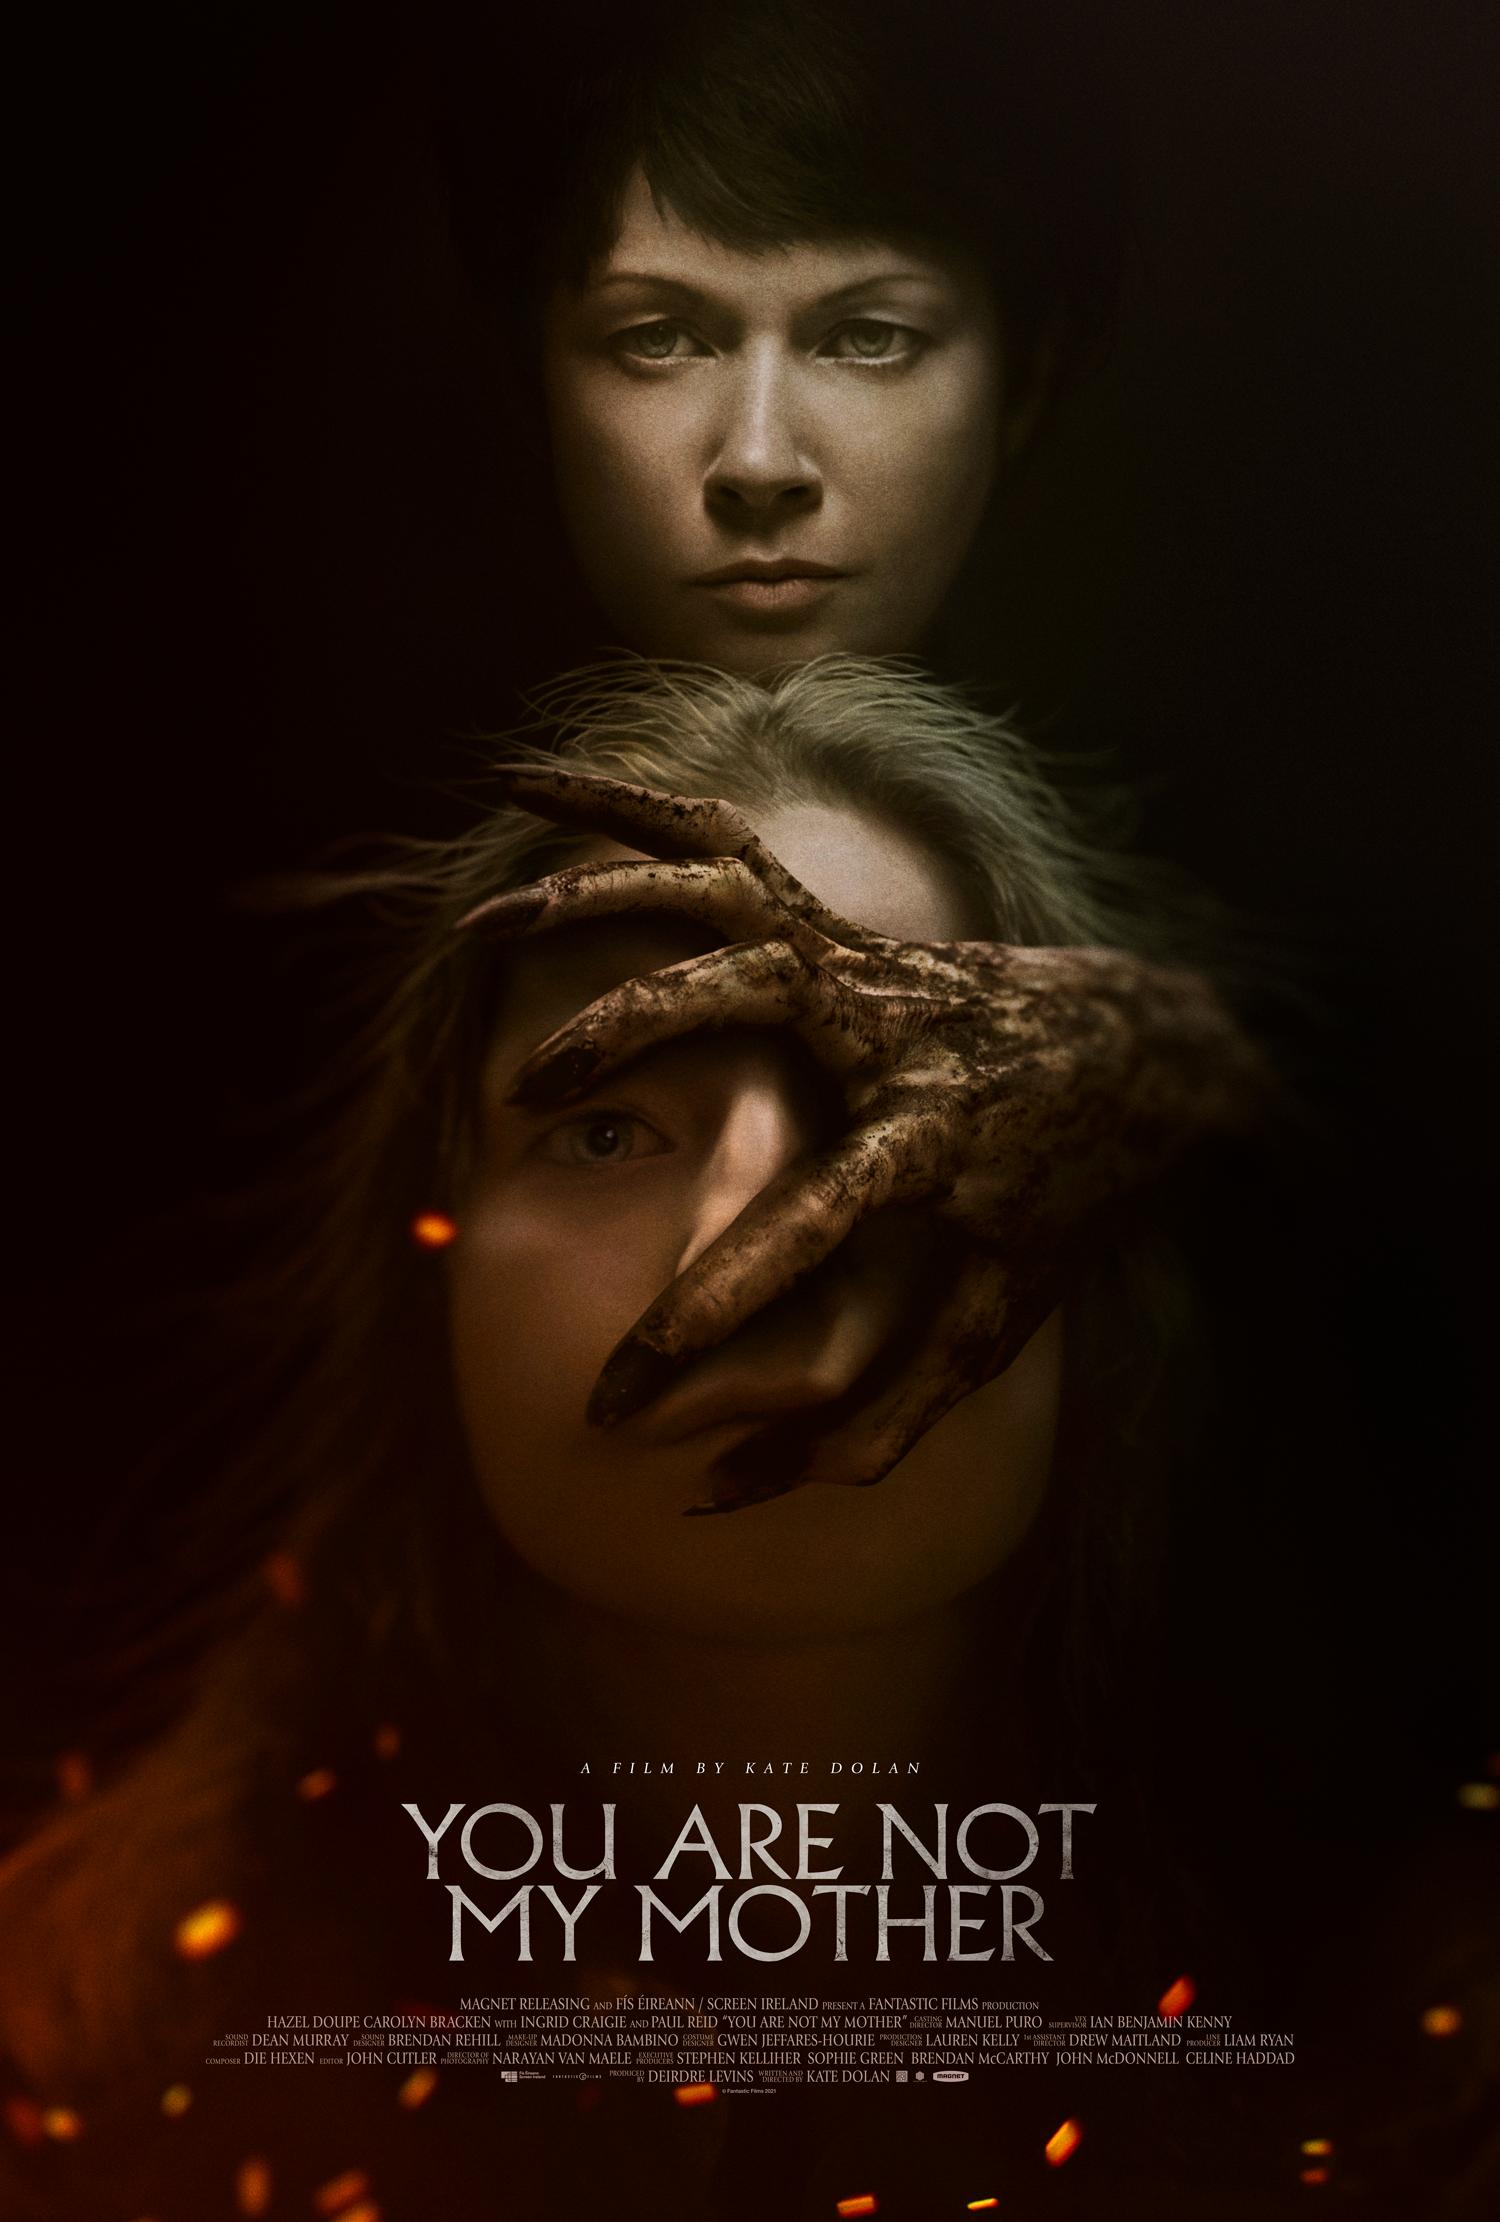 [NEWS] Il trailer dell’horror esoterico You Are Not My Mother